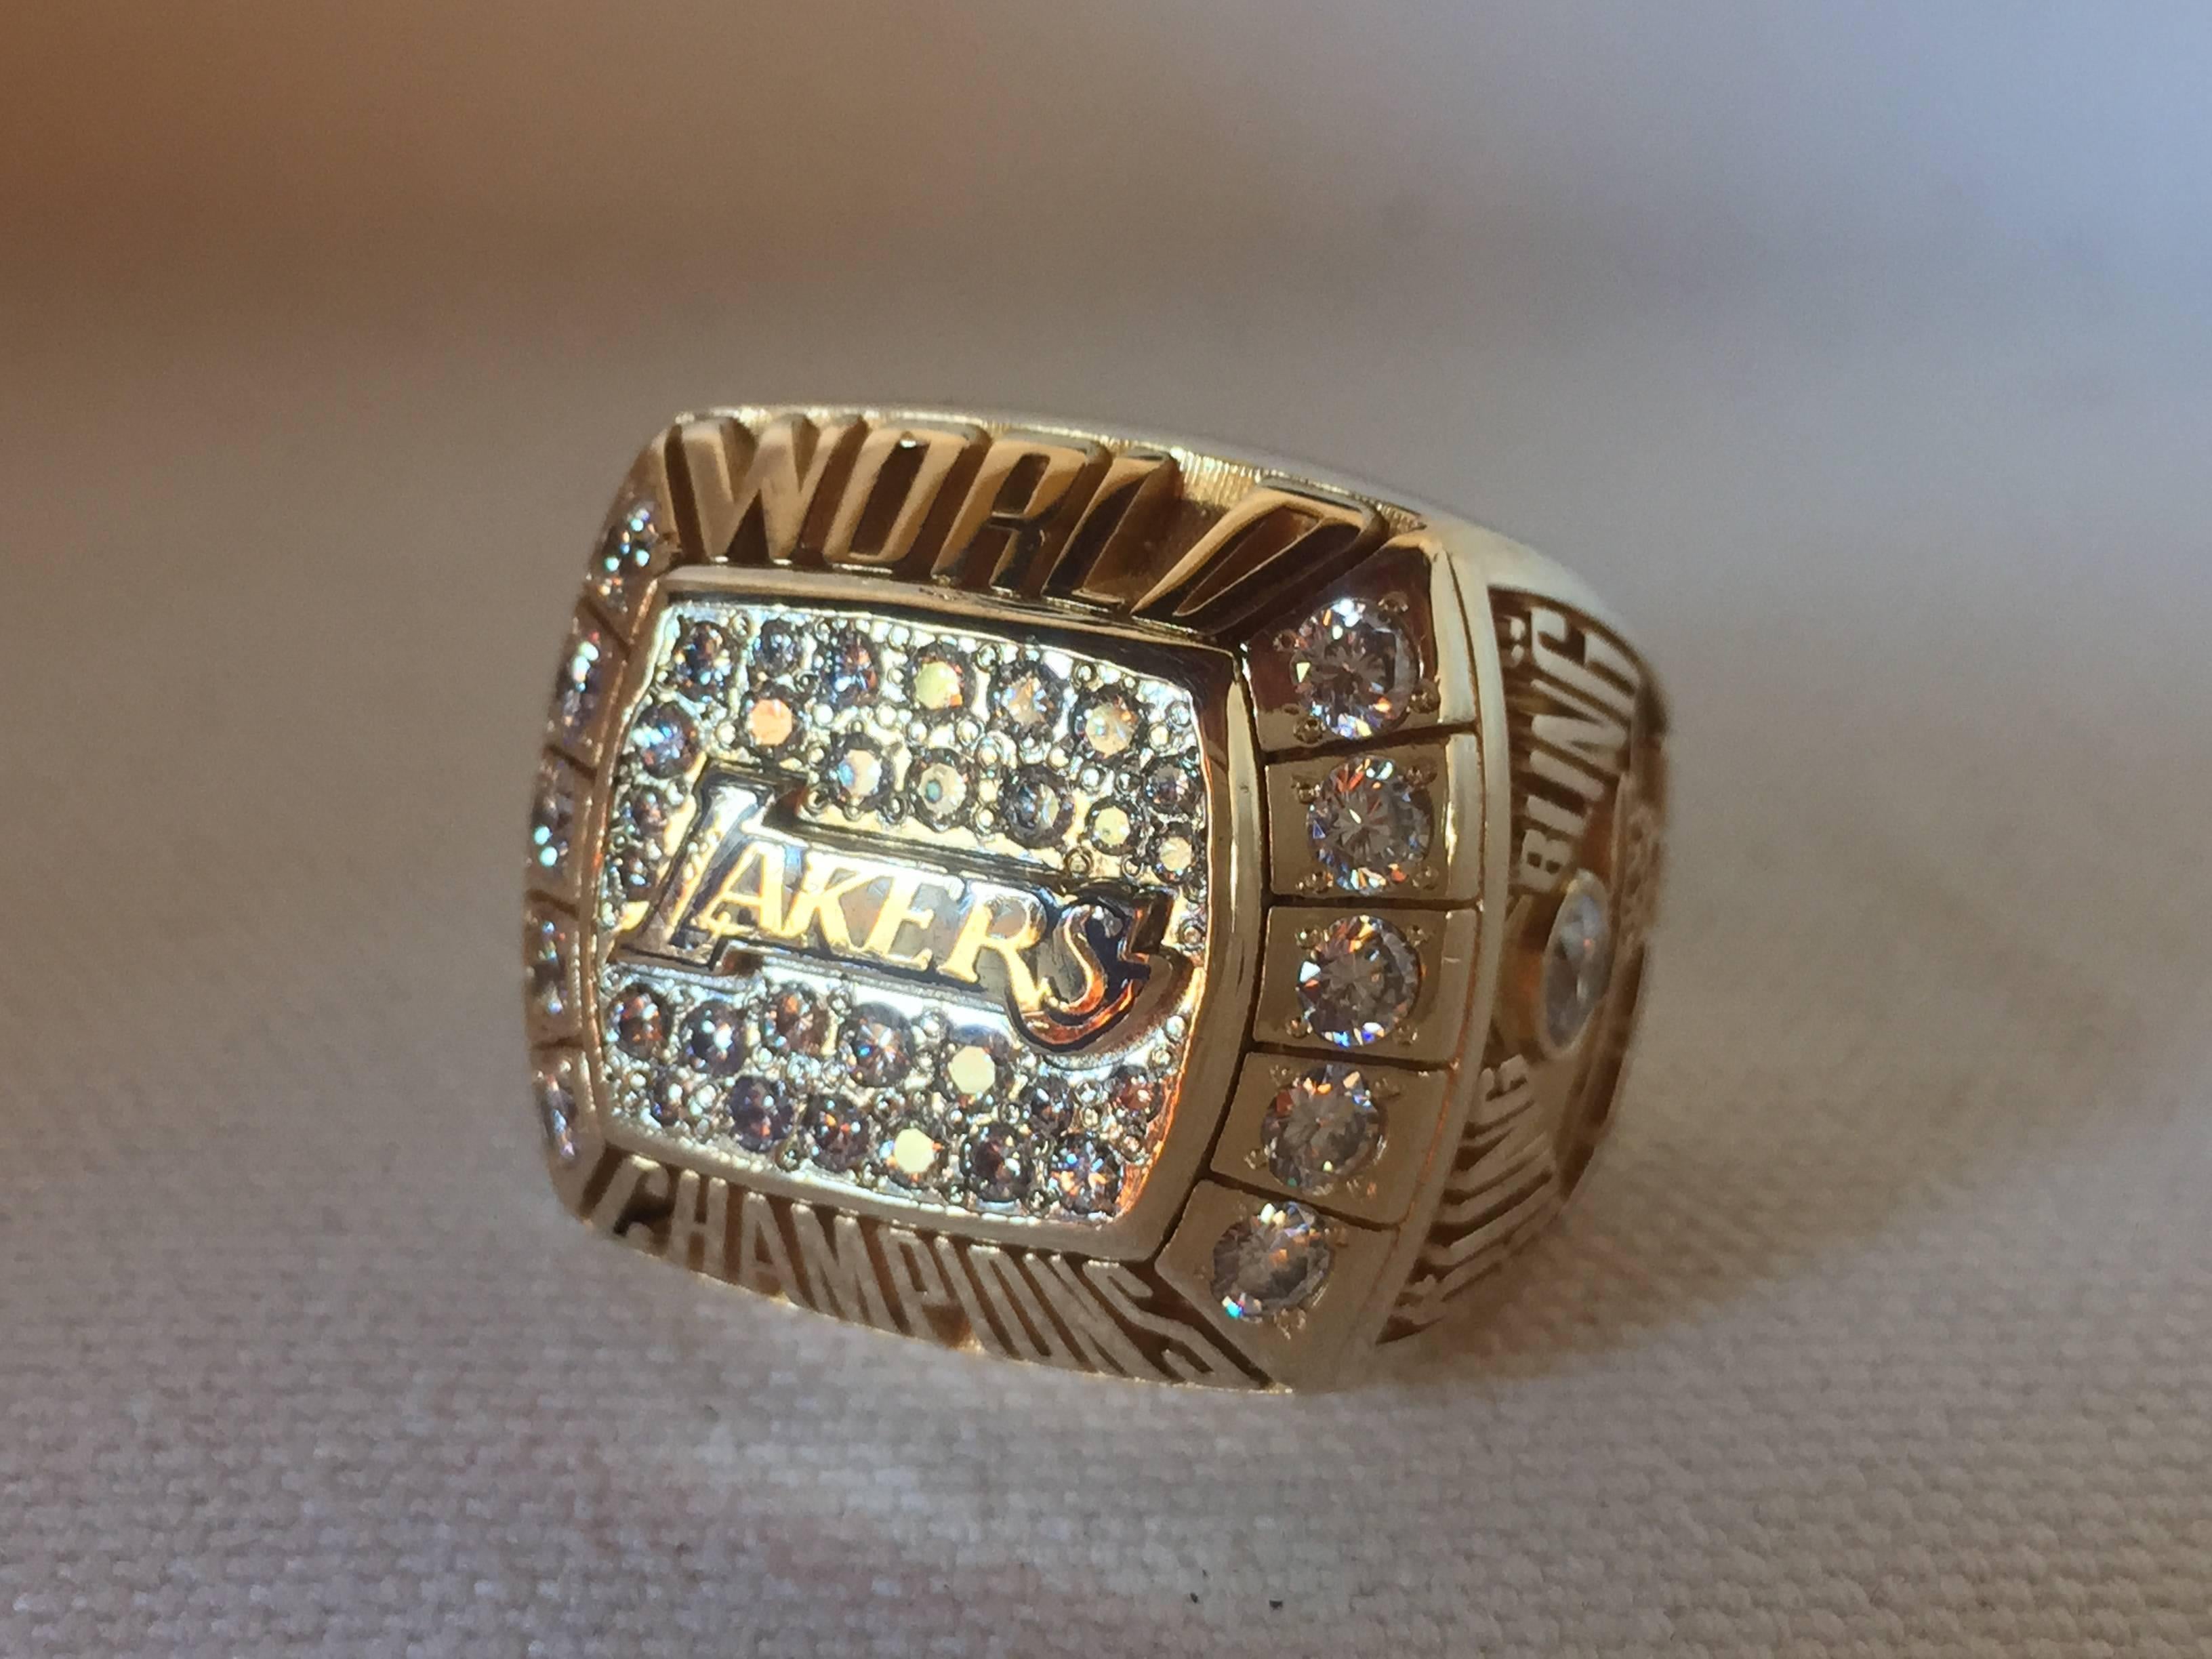 2000 Los Angeles Lakers NBA Championship Ring with Original Presentation Box In Excellent Condition For Sale In Carmel-by-the-sea, CA